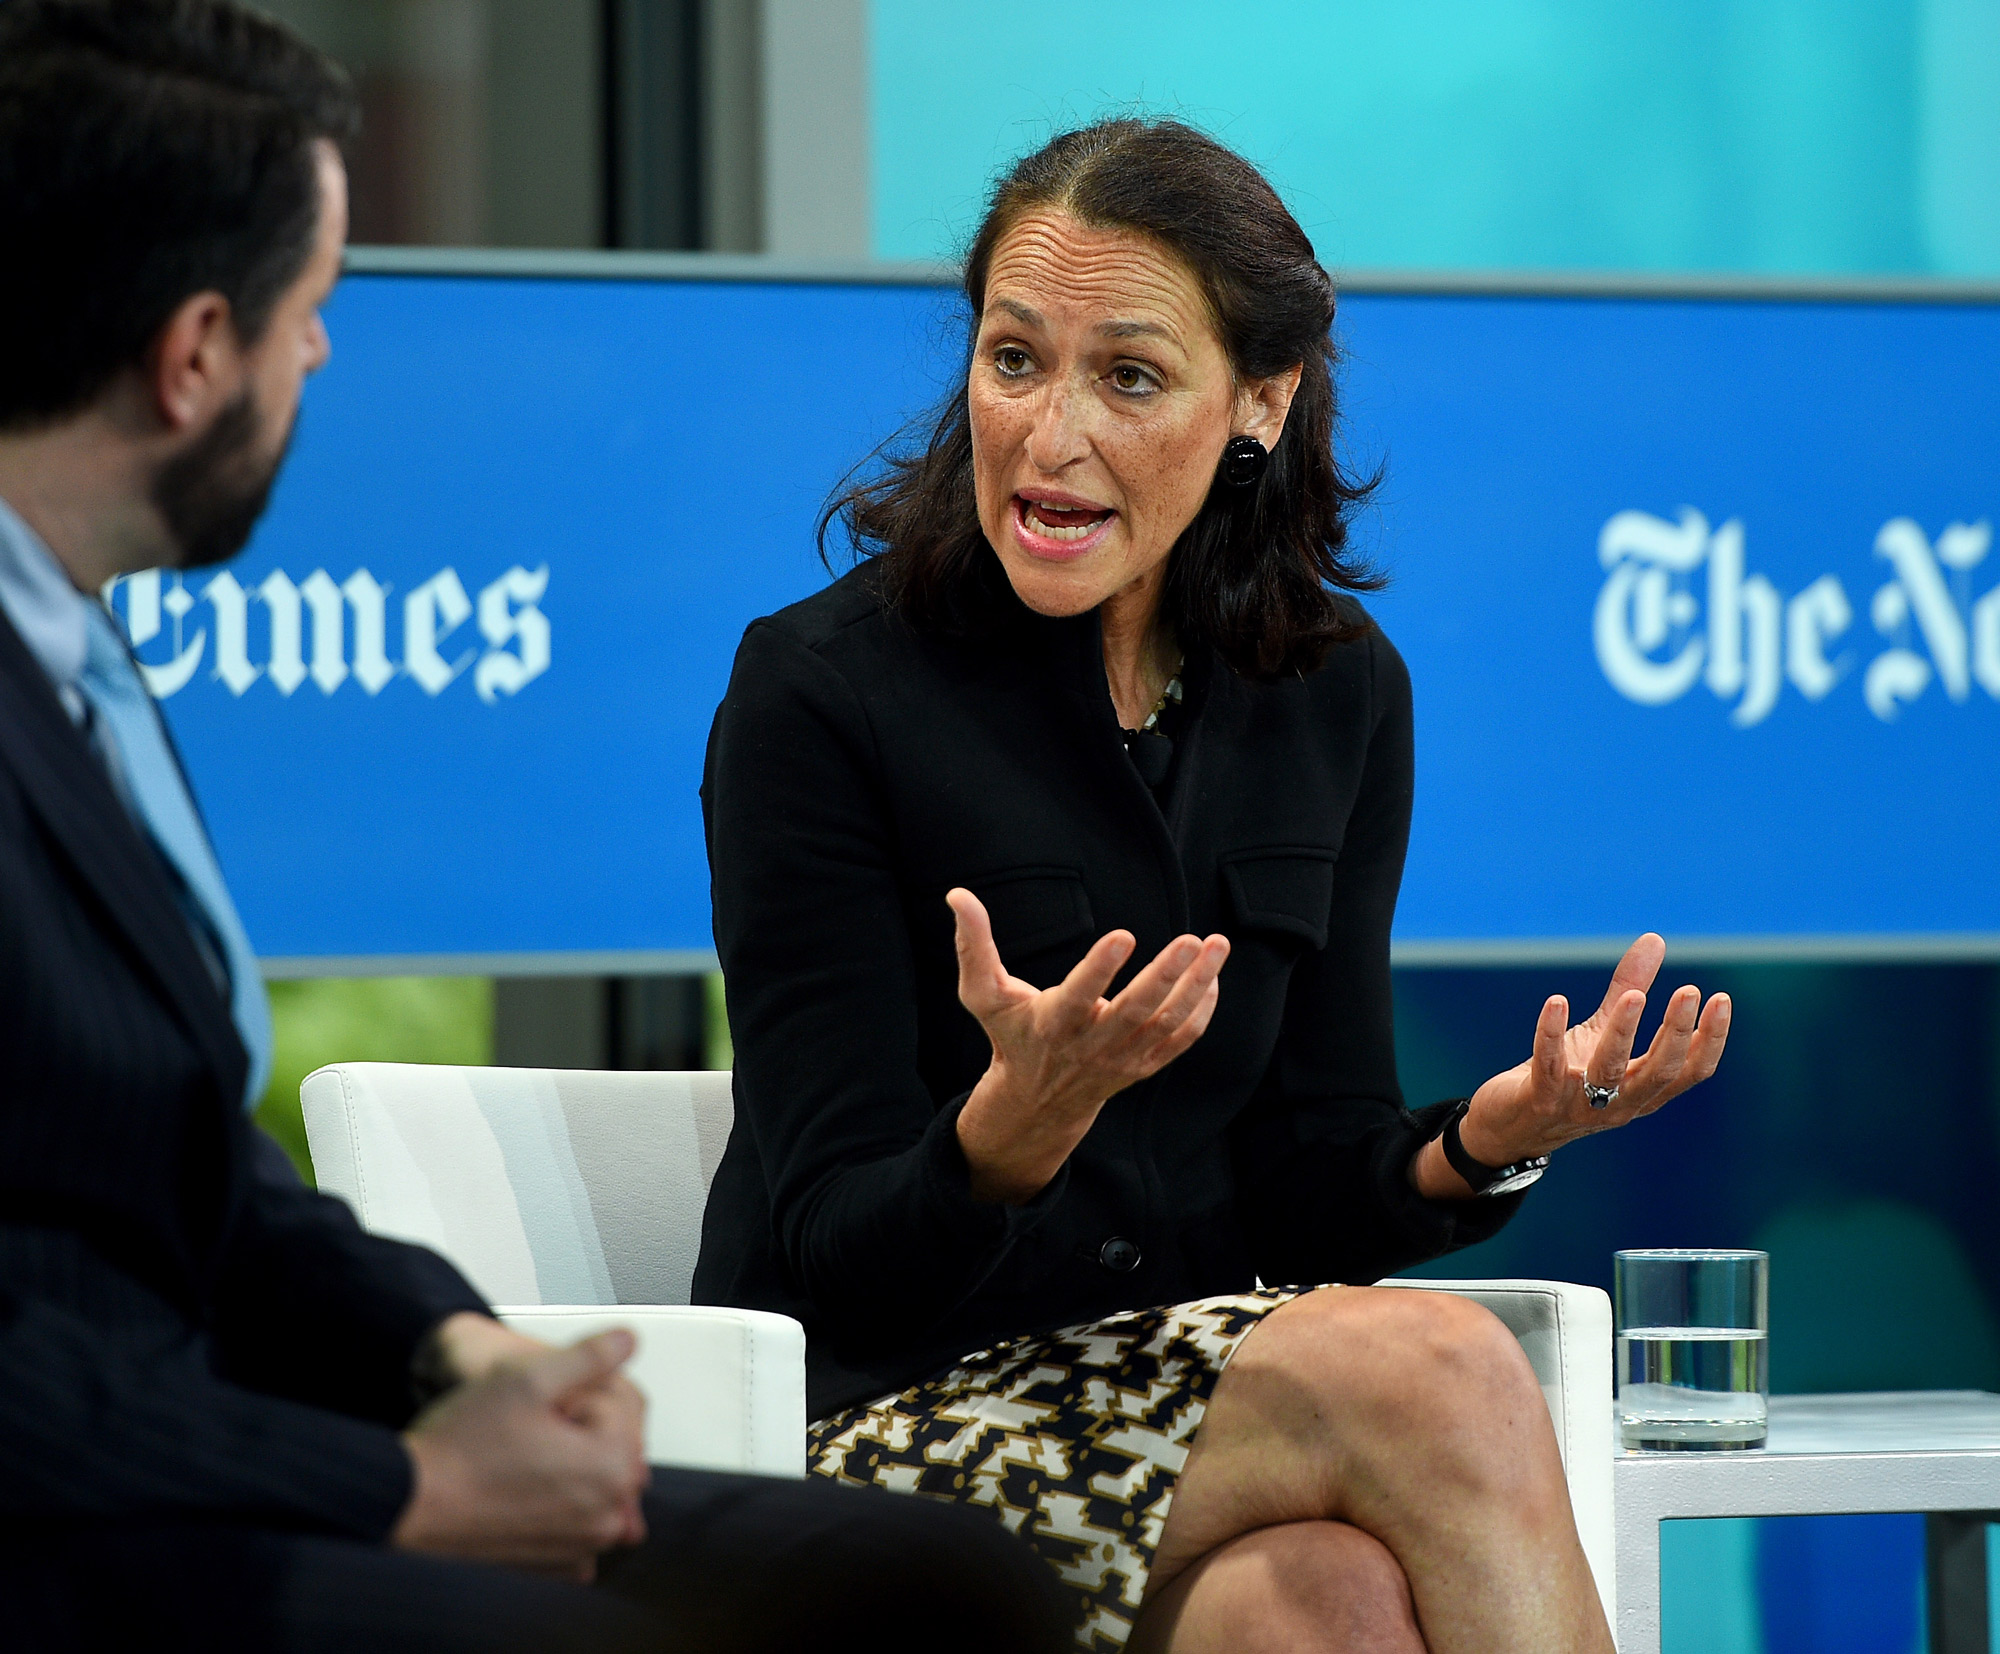 Former Commissioner of the U.S. Food and Drug Administration Dr. Margaret Hamburg speaks onstage during NY Times Cities For Tomorrow Conference on July 21, 2015 in New York City. 